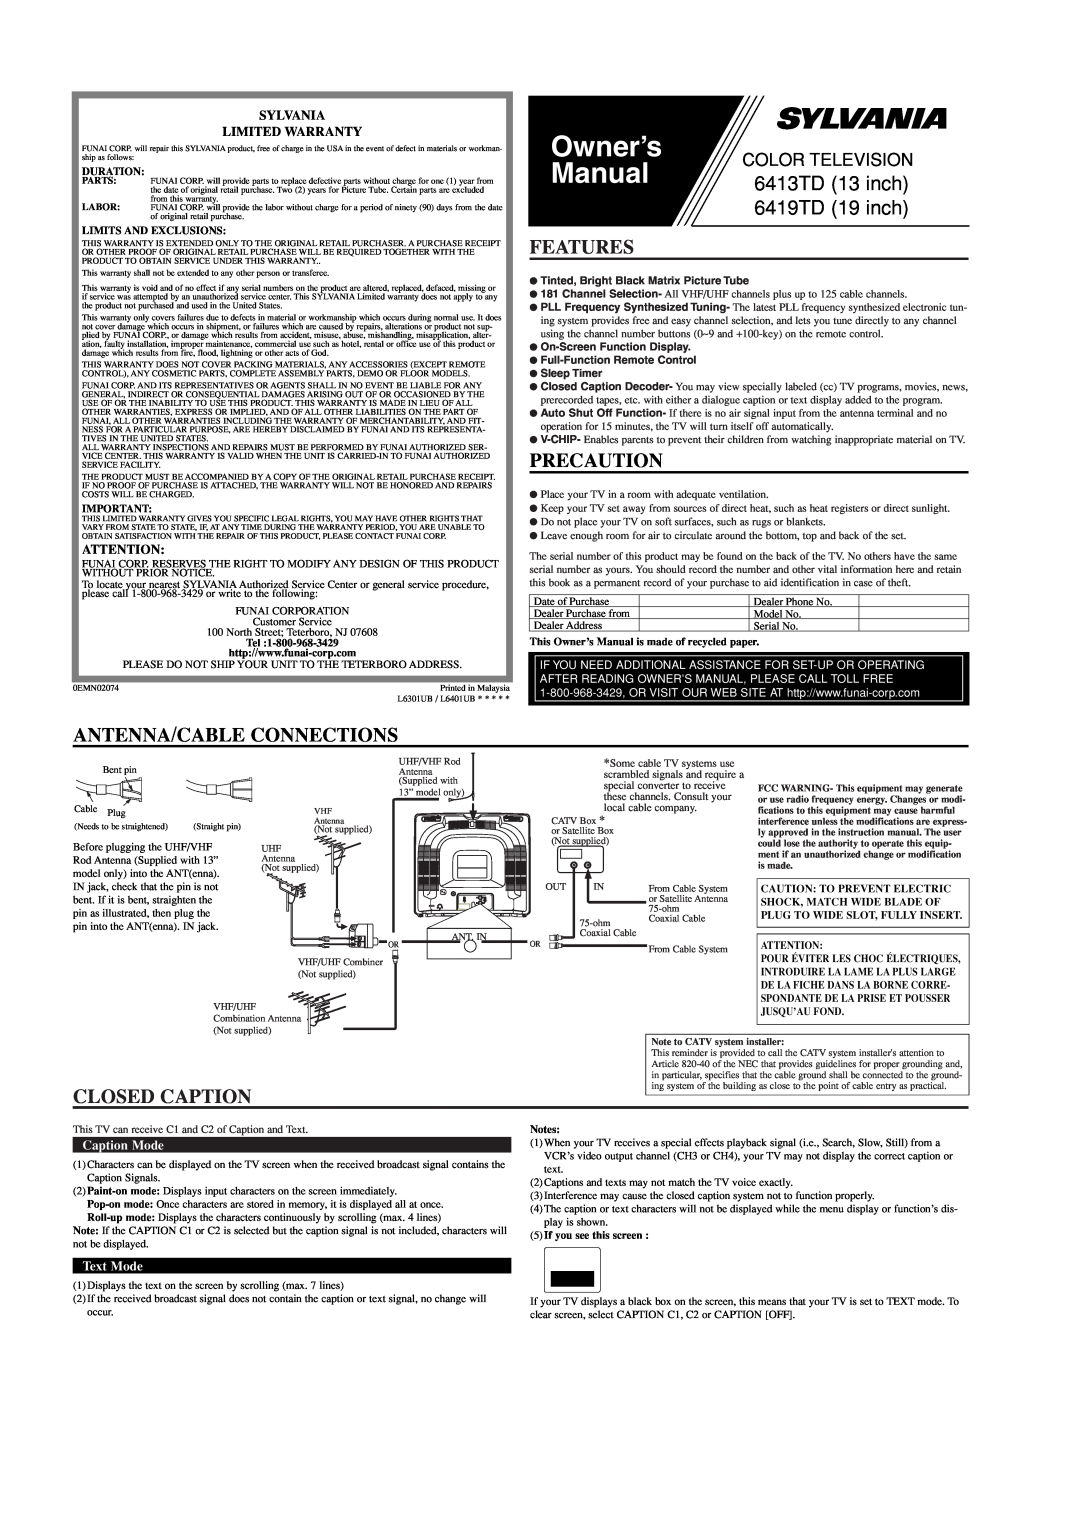 Sylvania 6413TD, 6419TD owner manual Features, Precaution, Antenna/Cable Connections, Closed Caption, Caption Mode, Manual 